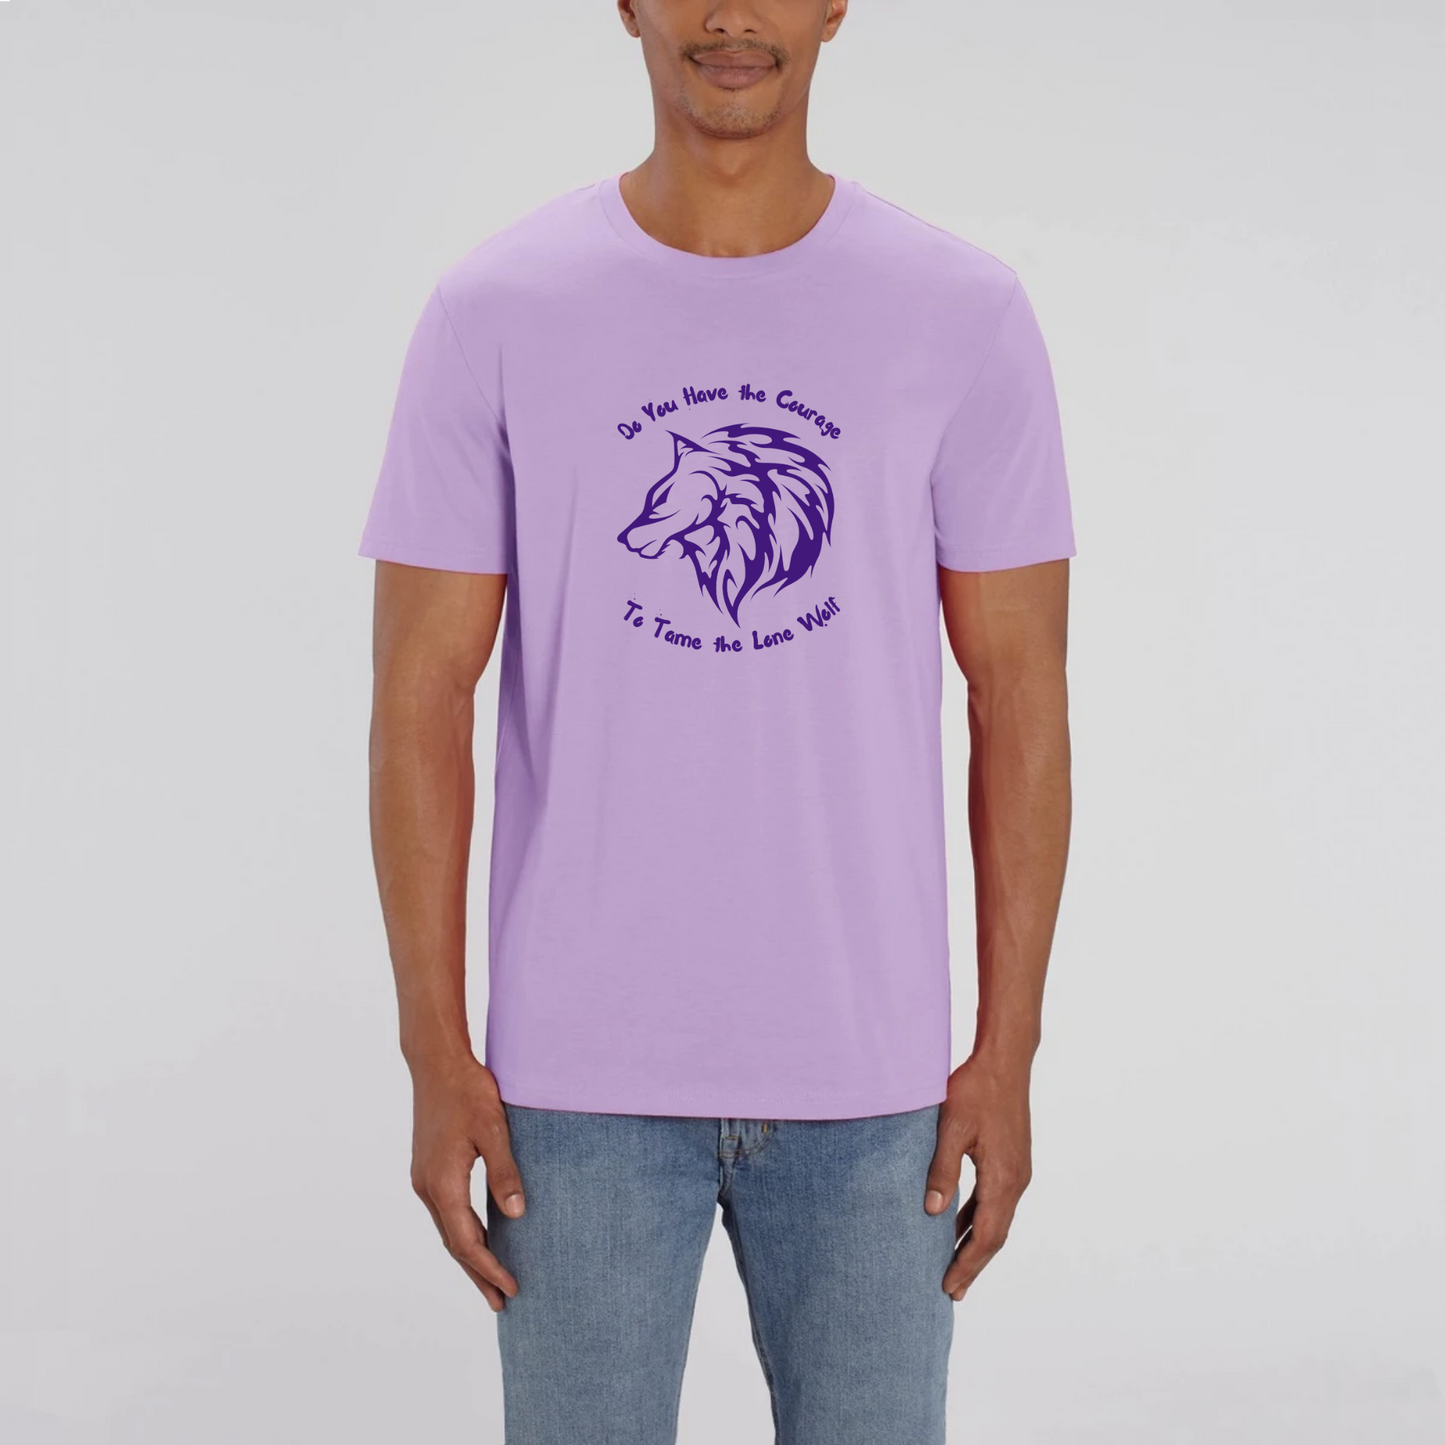 Graphic design t-shirt for men which features the head of a lone male wolf with the words "Do You Have the Courage to Tame the Lone Wolf". The t-shirt is lavender